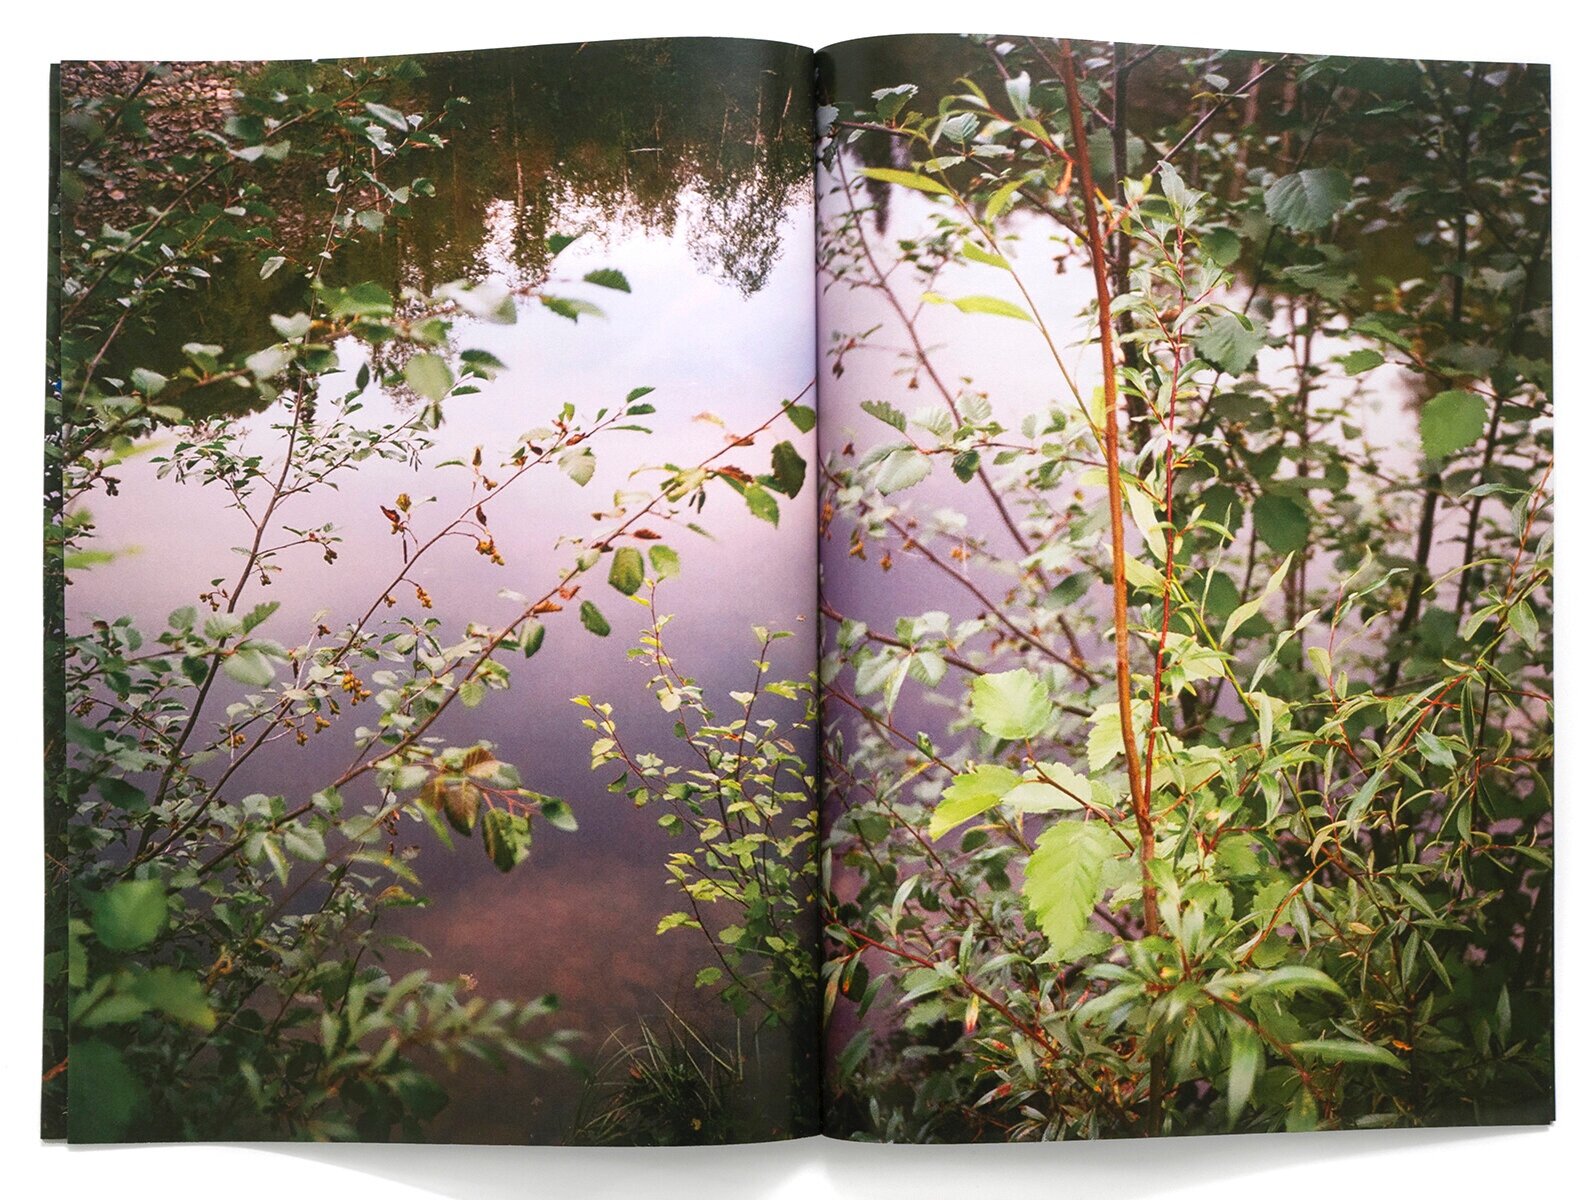  Pond, laser print book, 8 pages, 12.25” x 16.5”, 2020 